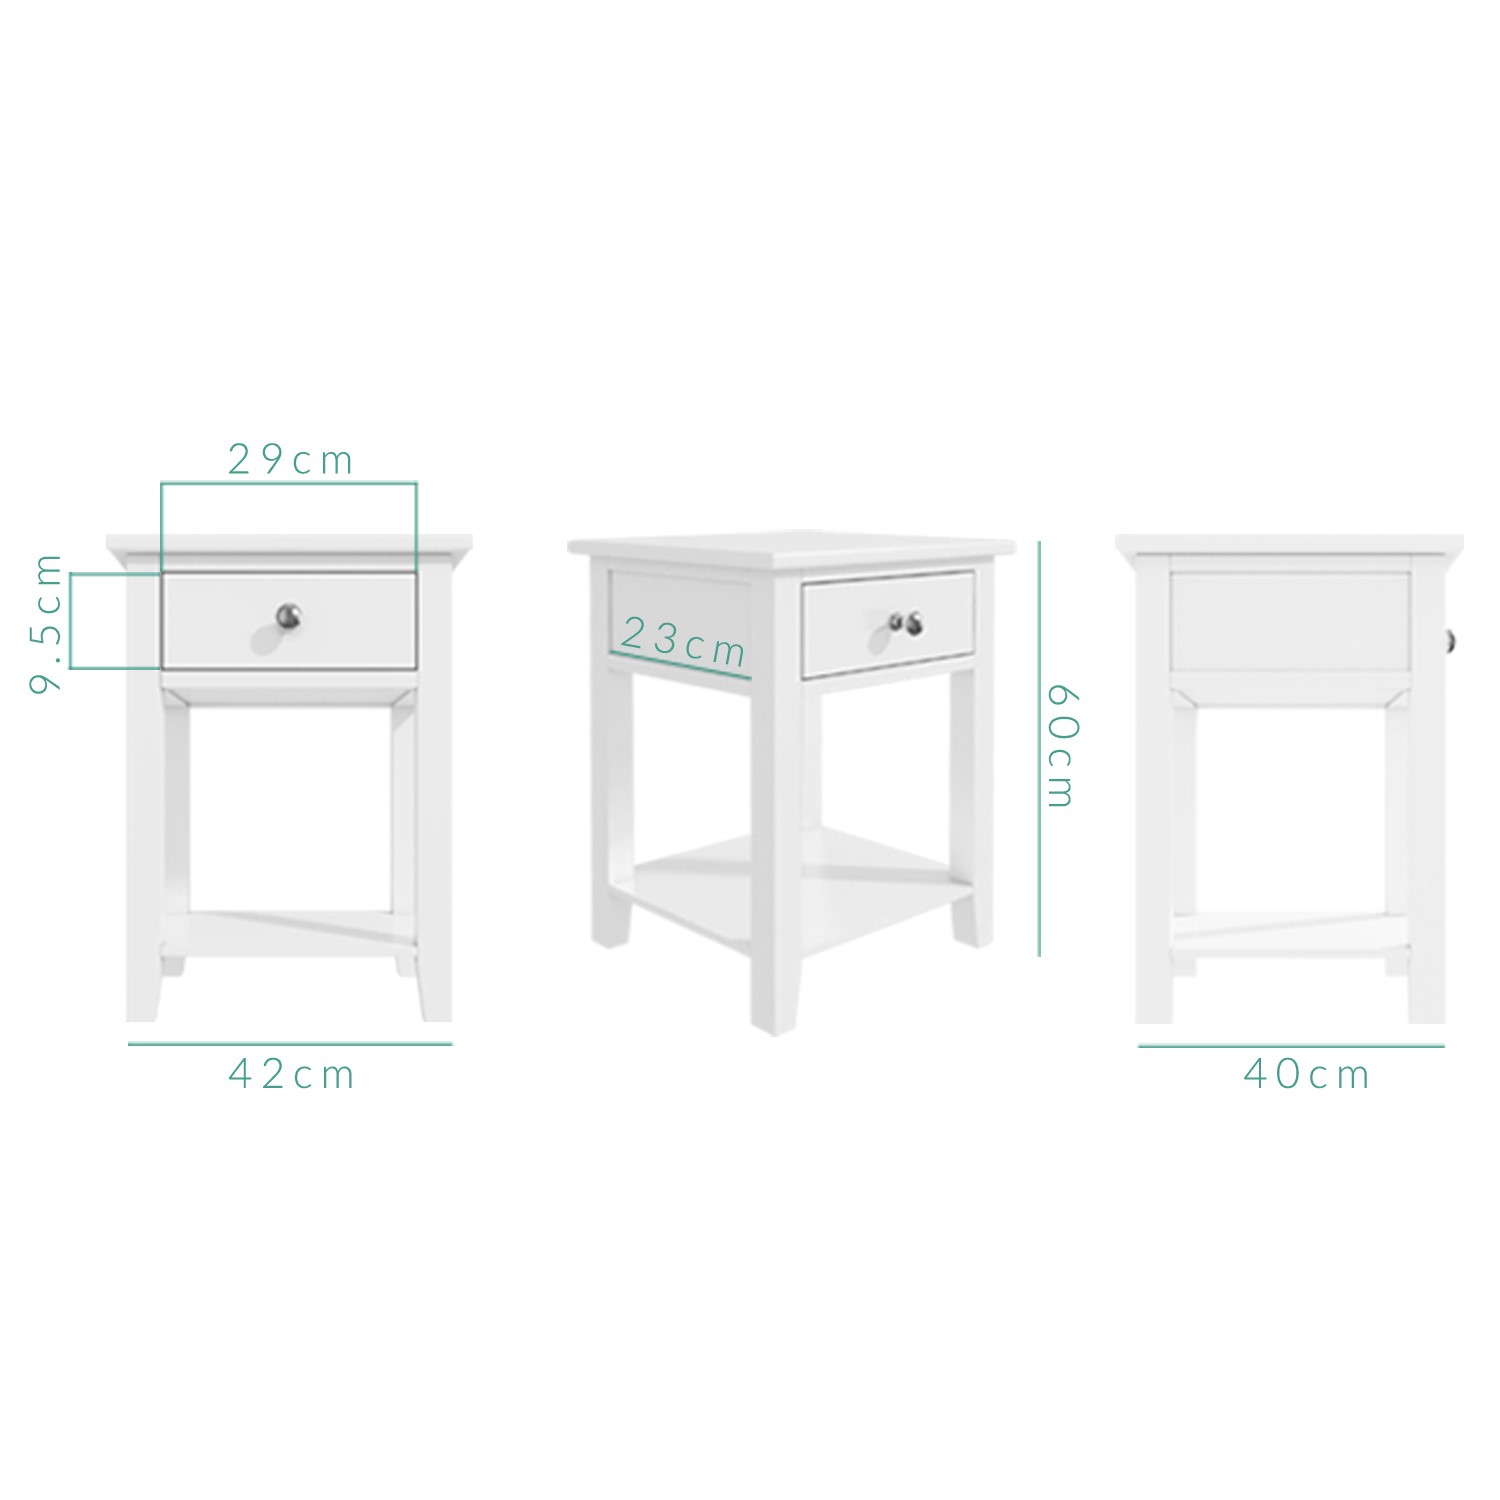 Read more about White painted bedside table with drawer harper